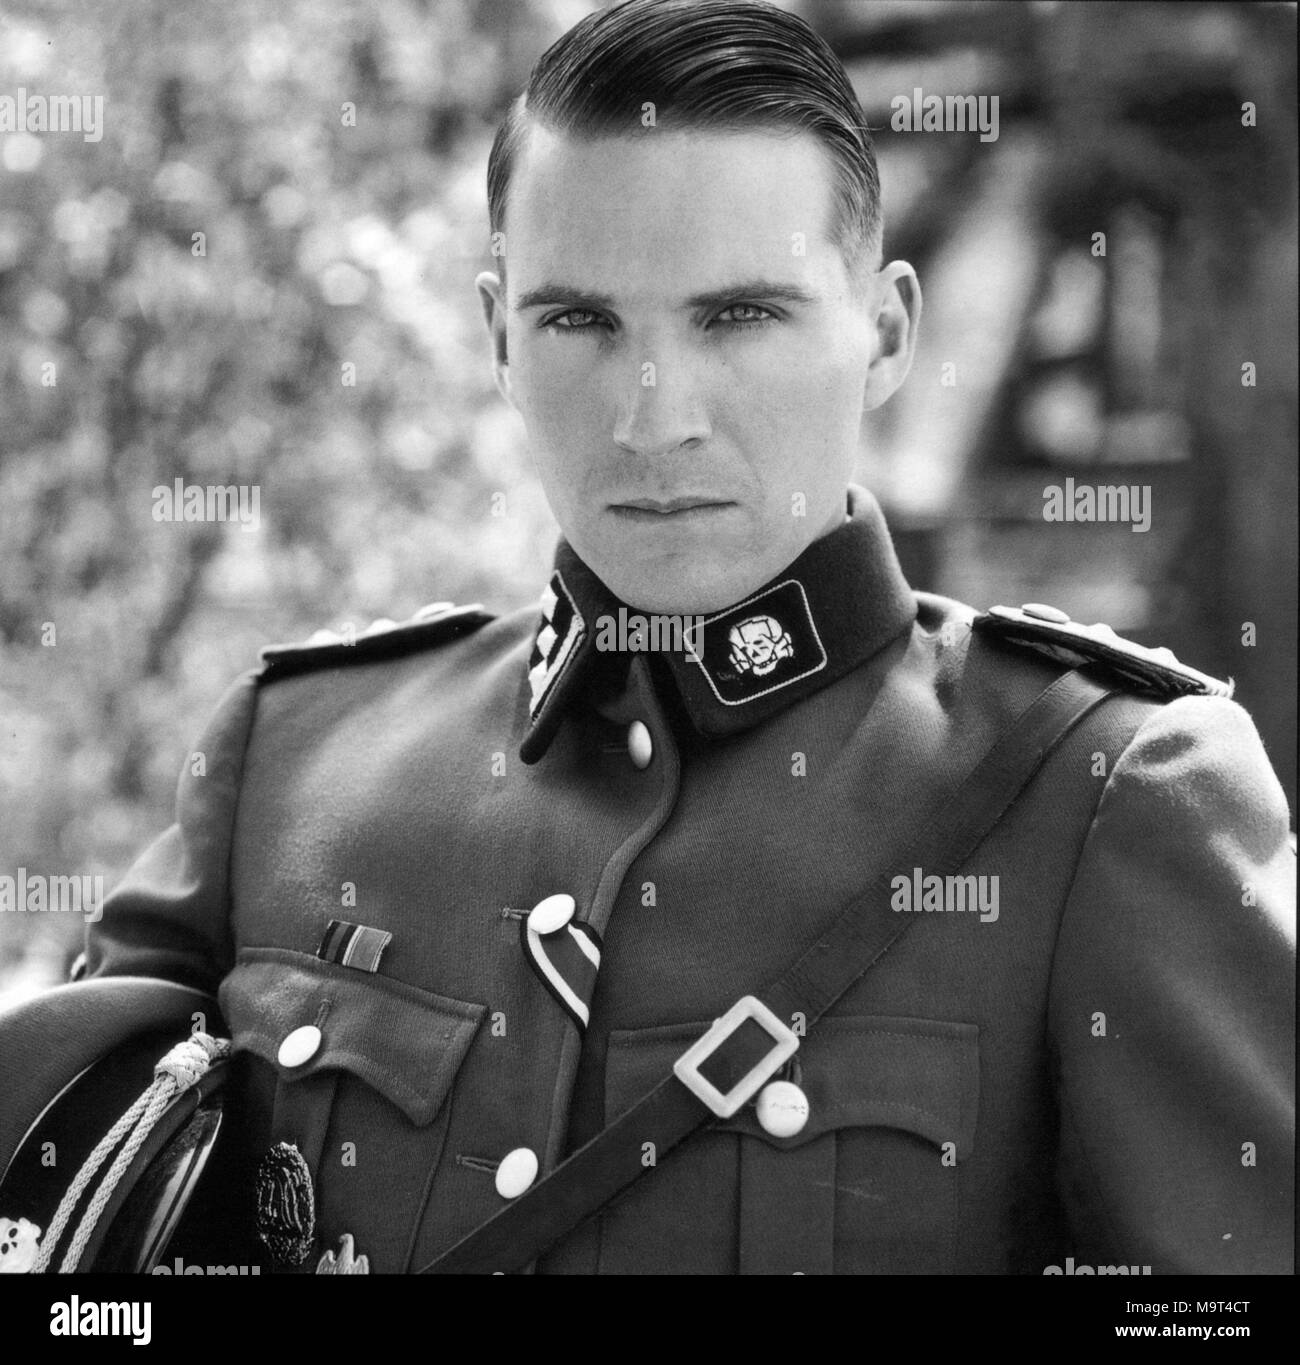 SCHINDLER'S PERSO 1993 Universal Pictures film con Ralph Fiennes come Amon Göth Foto Stock